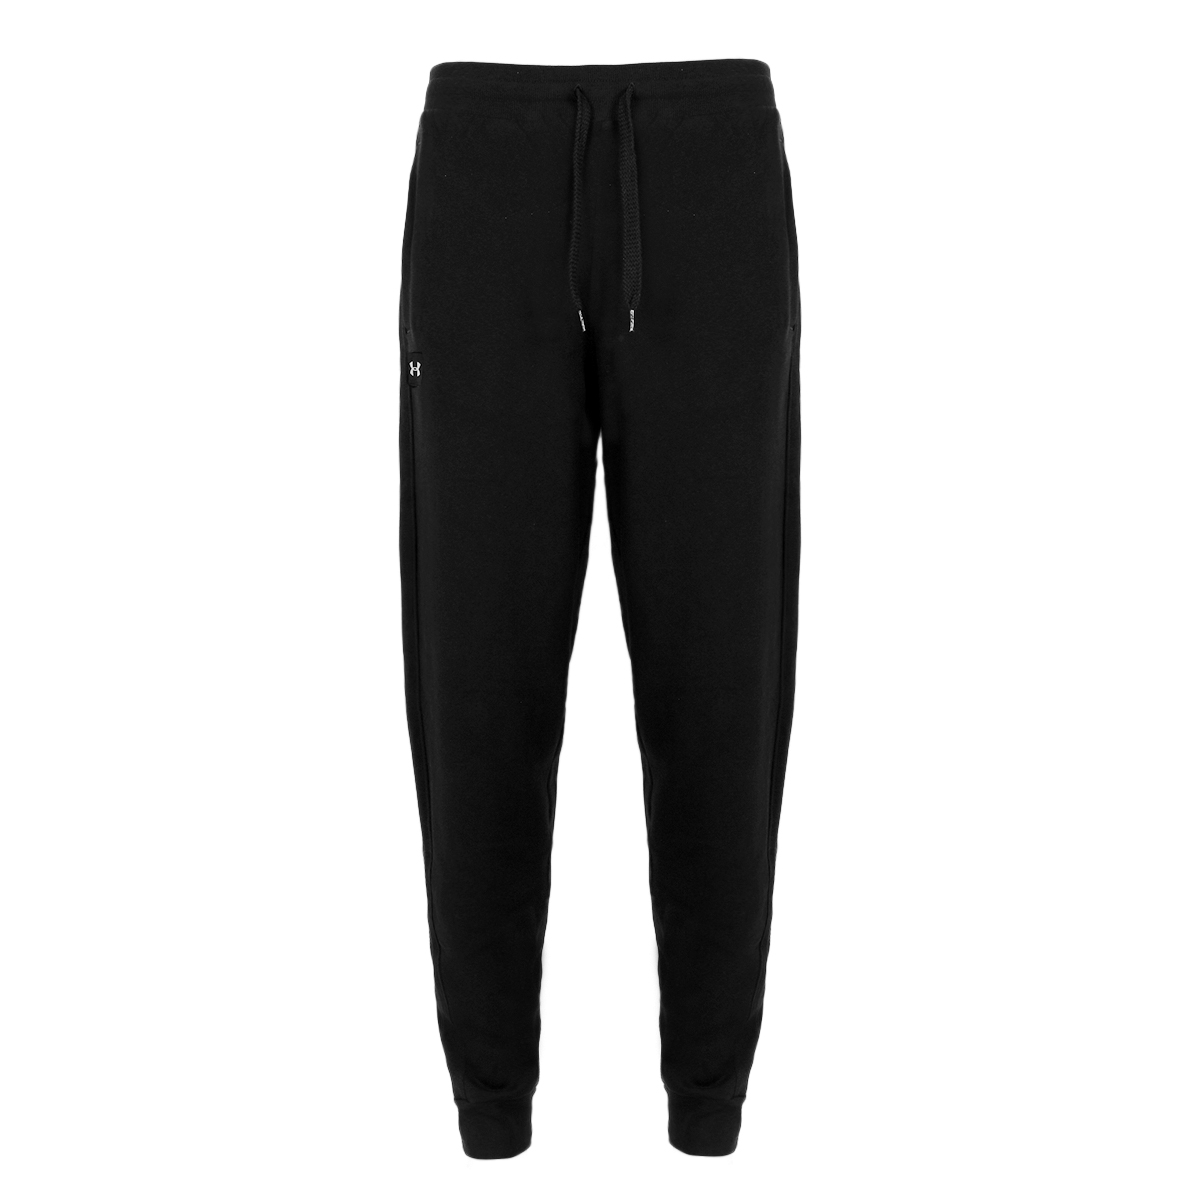 Under Armour 13207400203X Mens Rival Fleece Jogger Athletic Pants Charcoal 3X - image 2 of 3